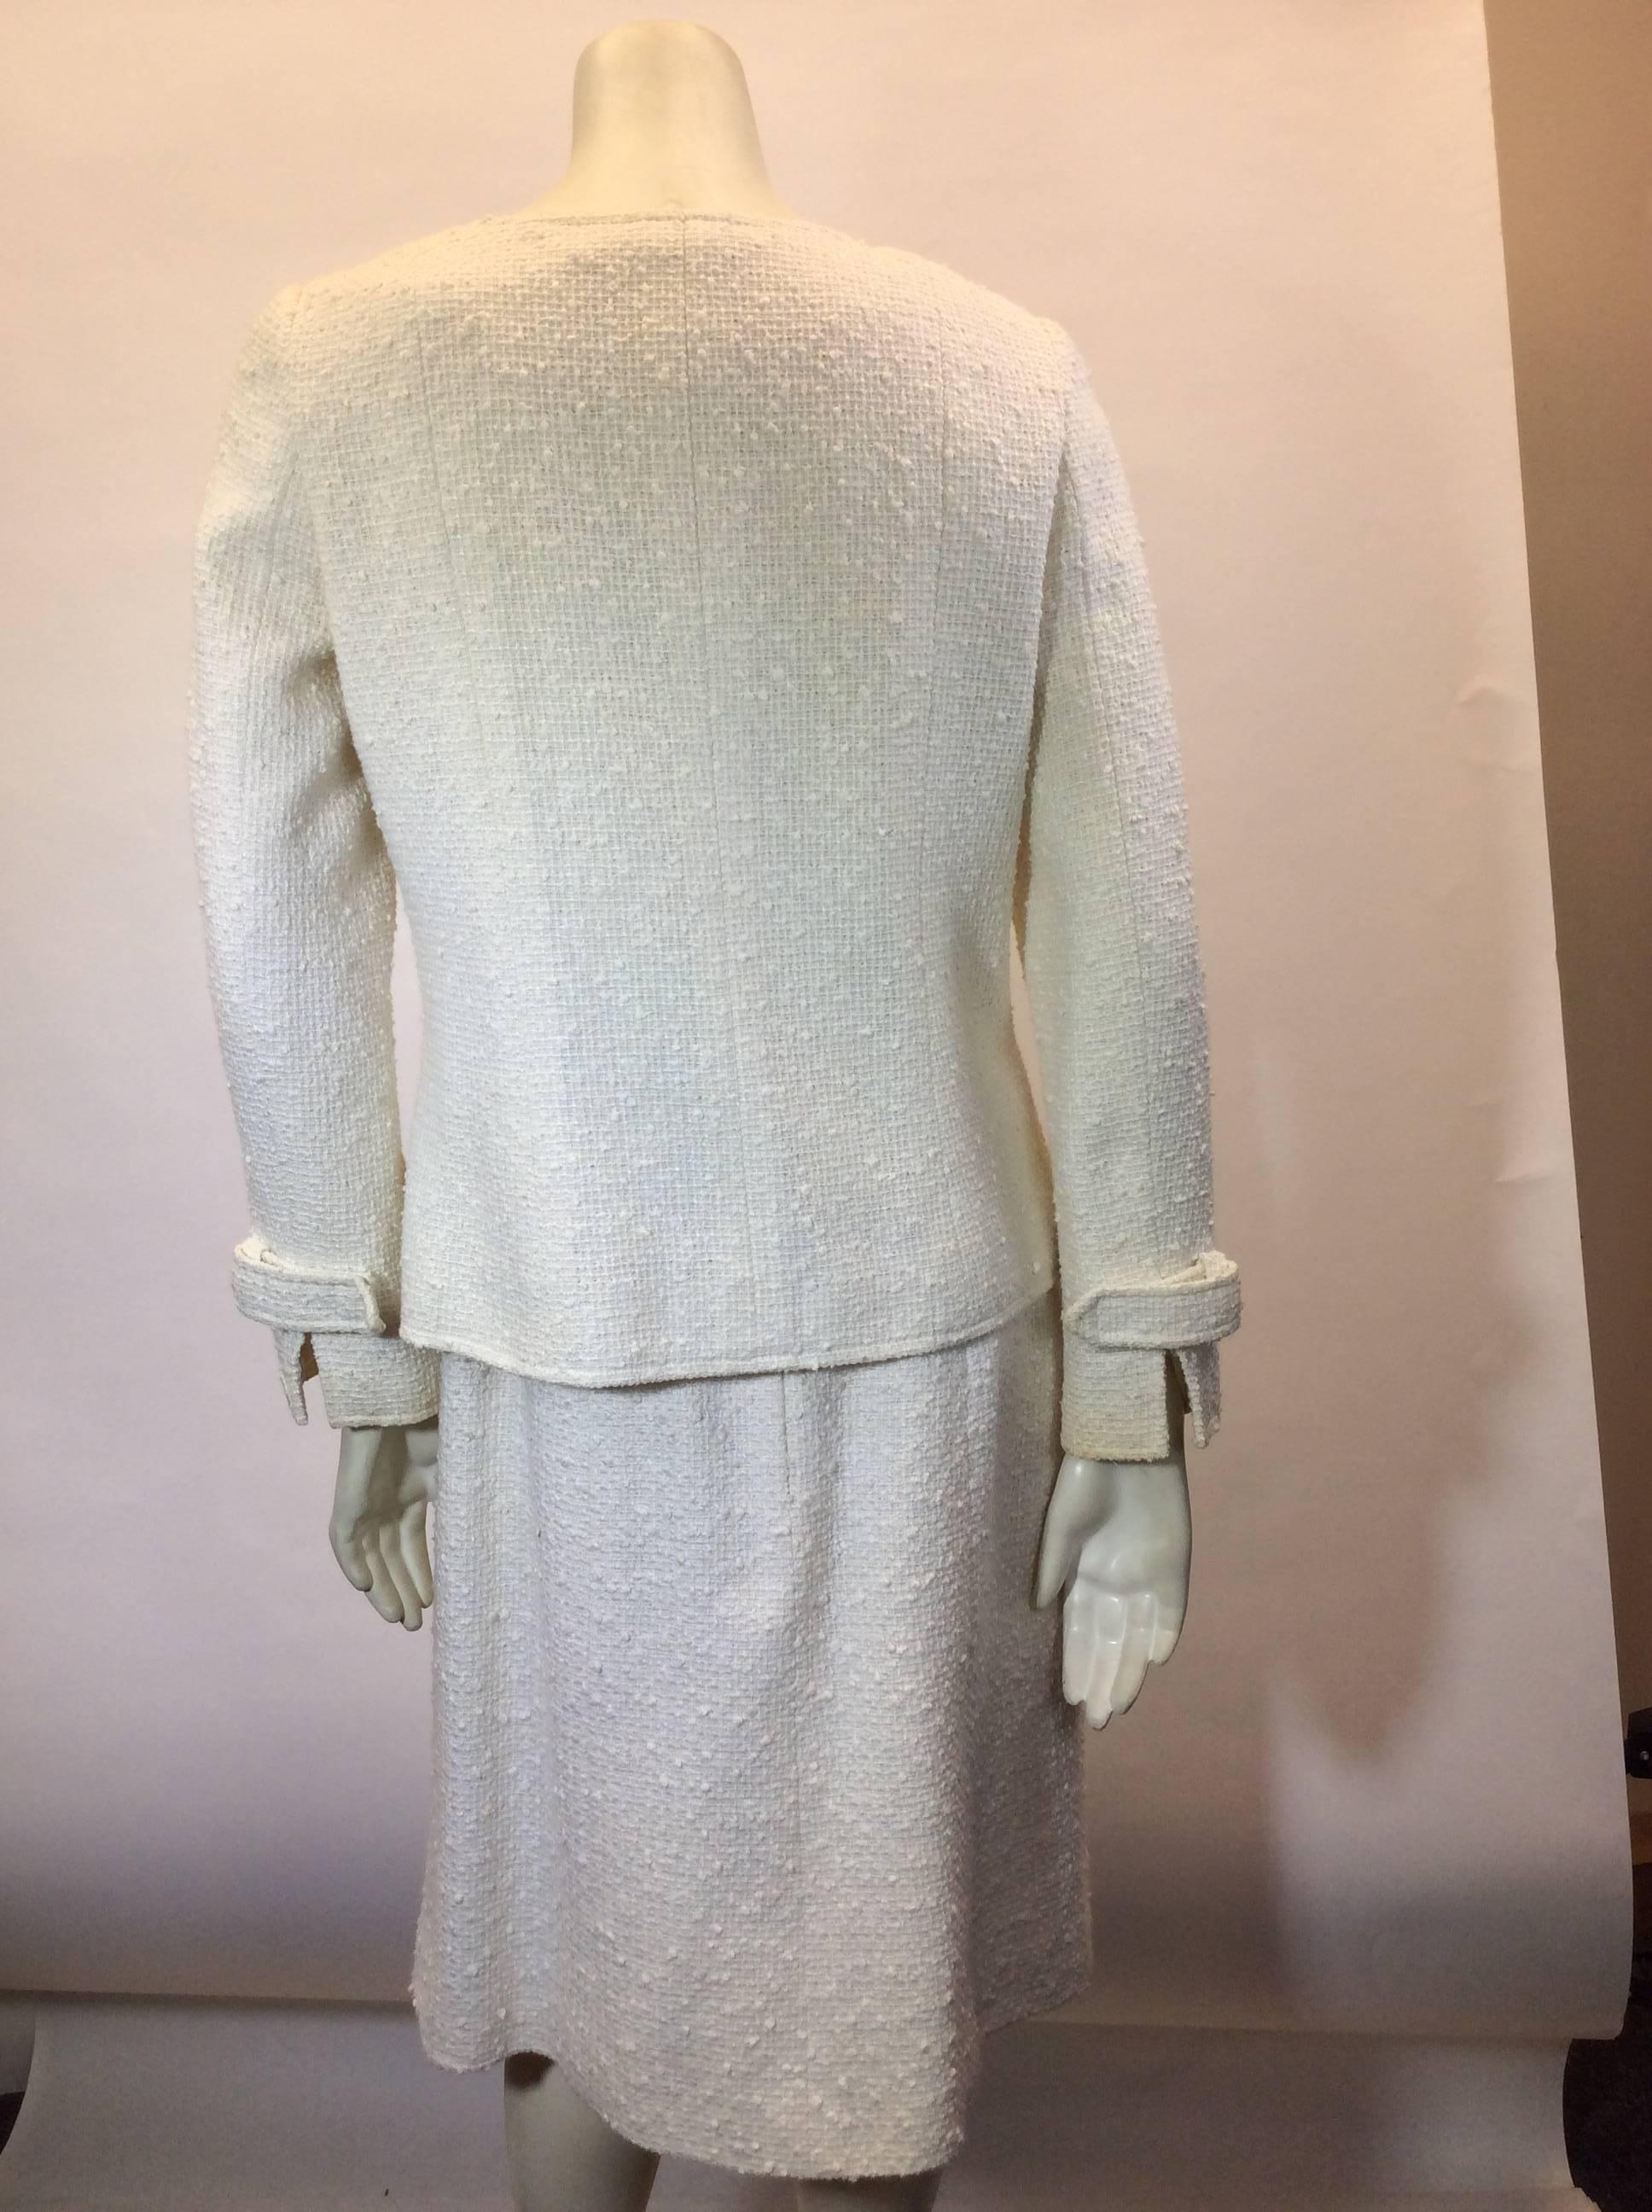 Chanel Winter White 2 Piece Skirt Suit  In Excellent Condition For Sale In Narberth, PA